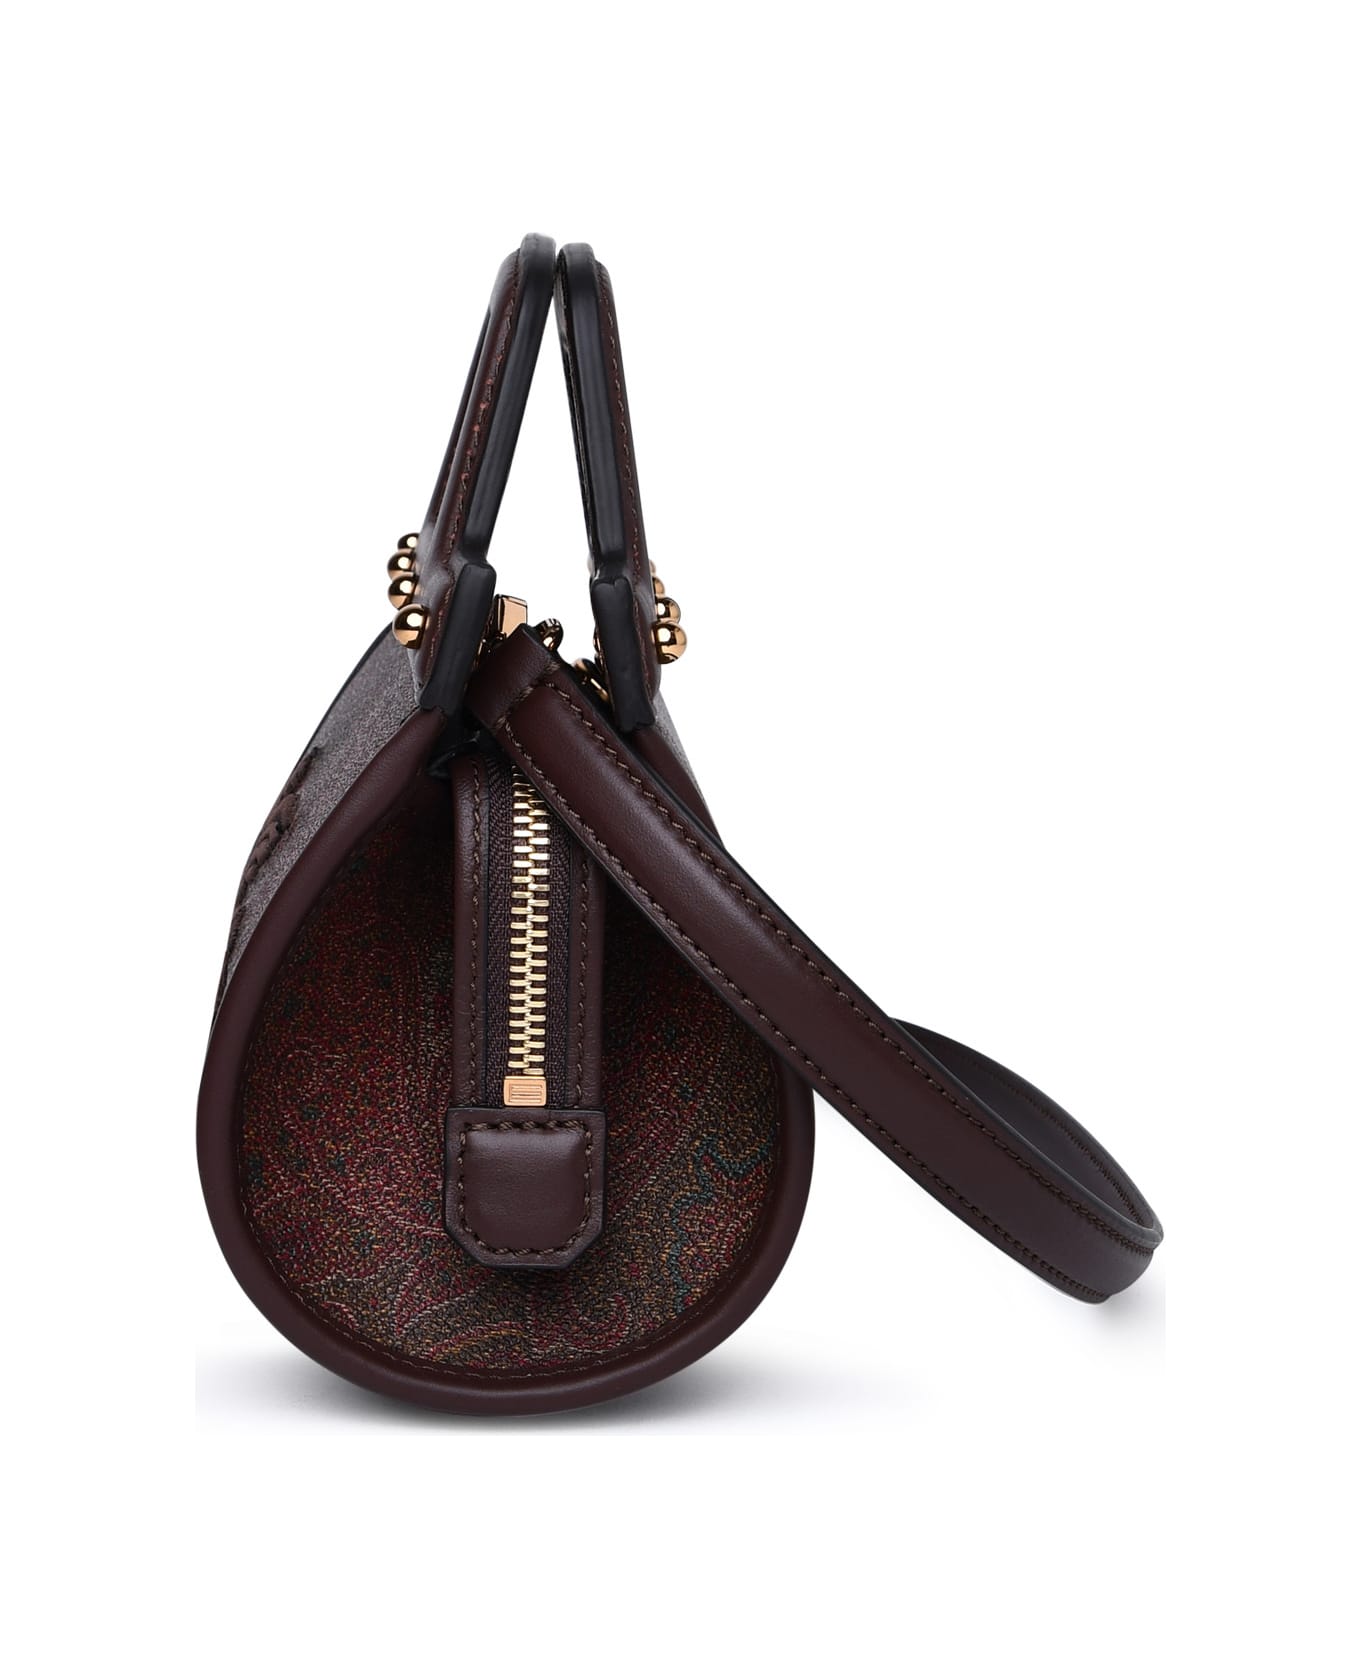 Etro Brown Leather Blend Bag - Marrone トートバッグ